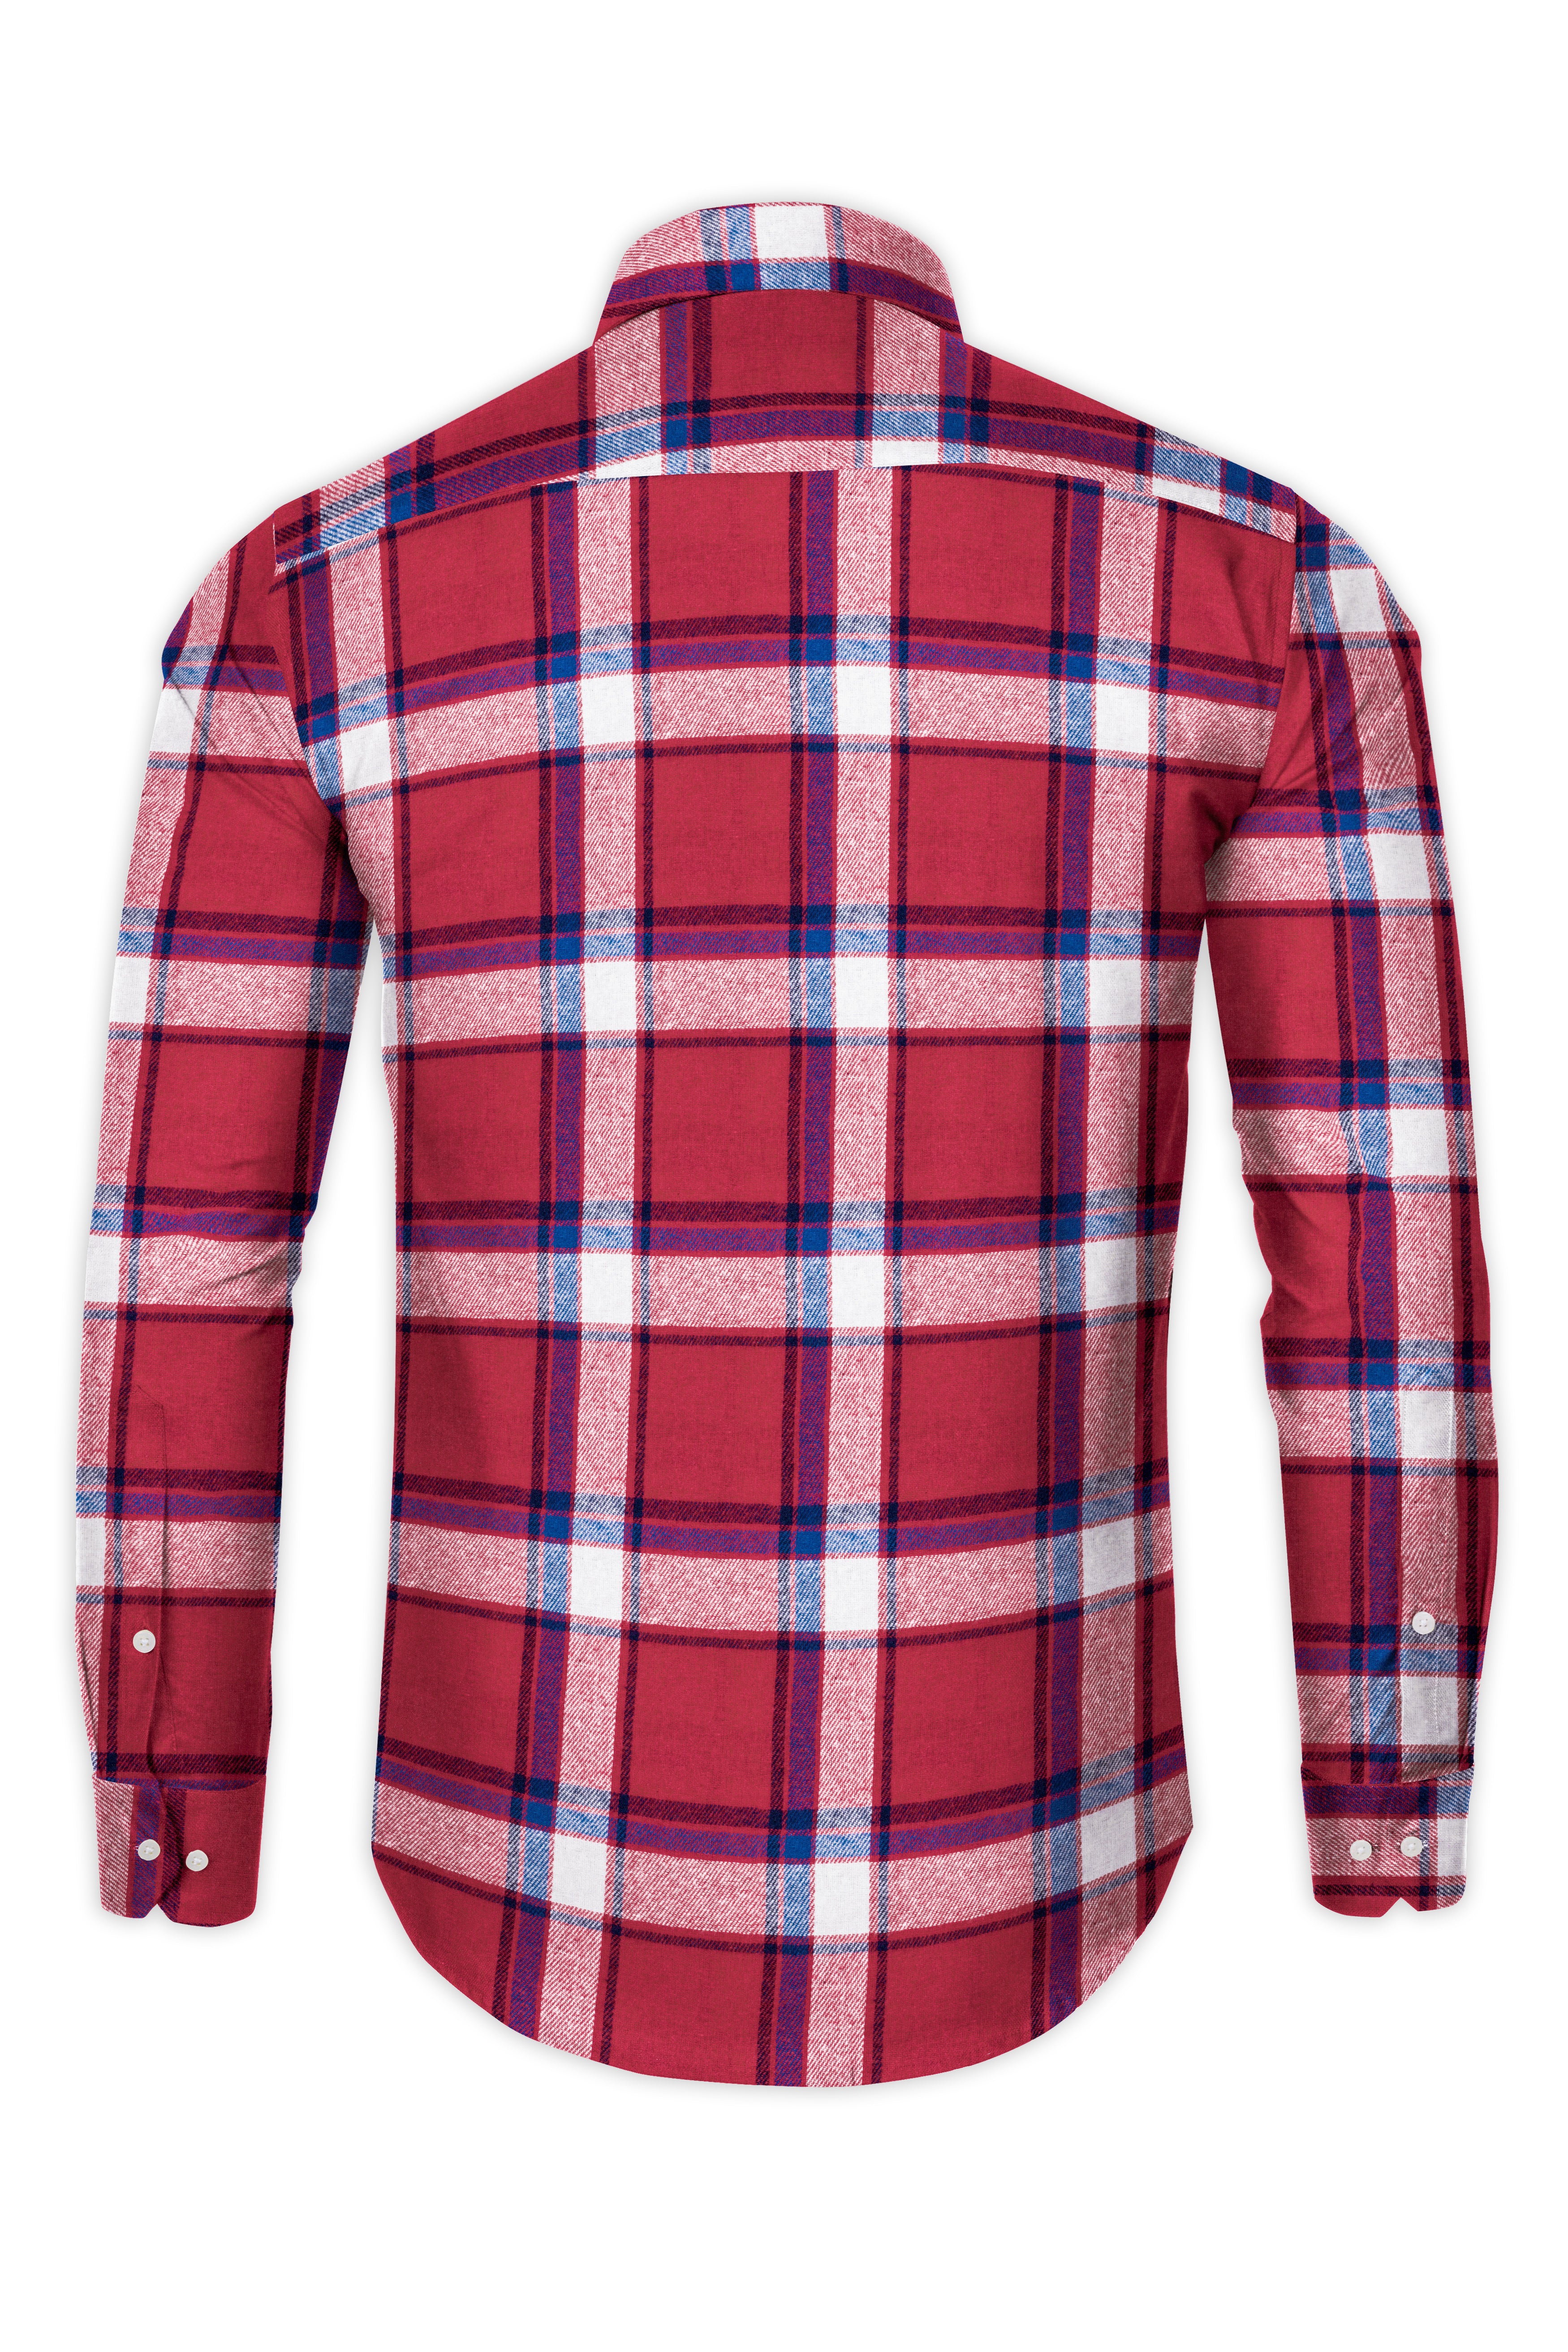 Vivid Auburn Red with Downriver Blue and White Plaid Flannel shirt